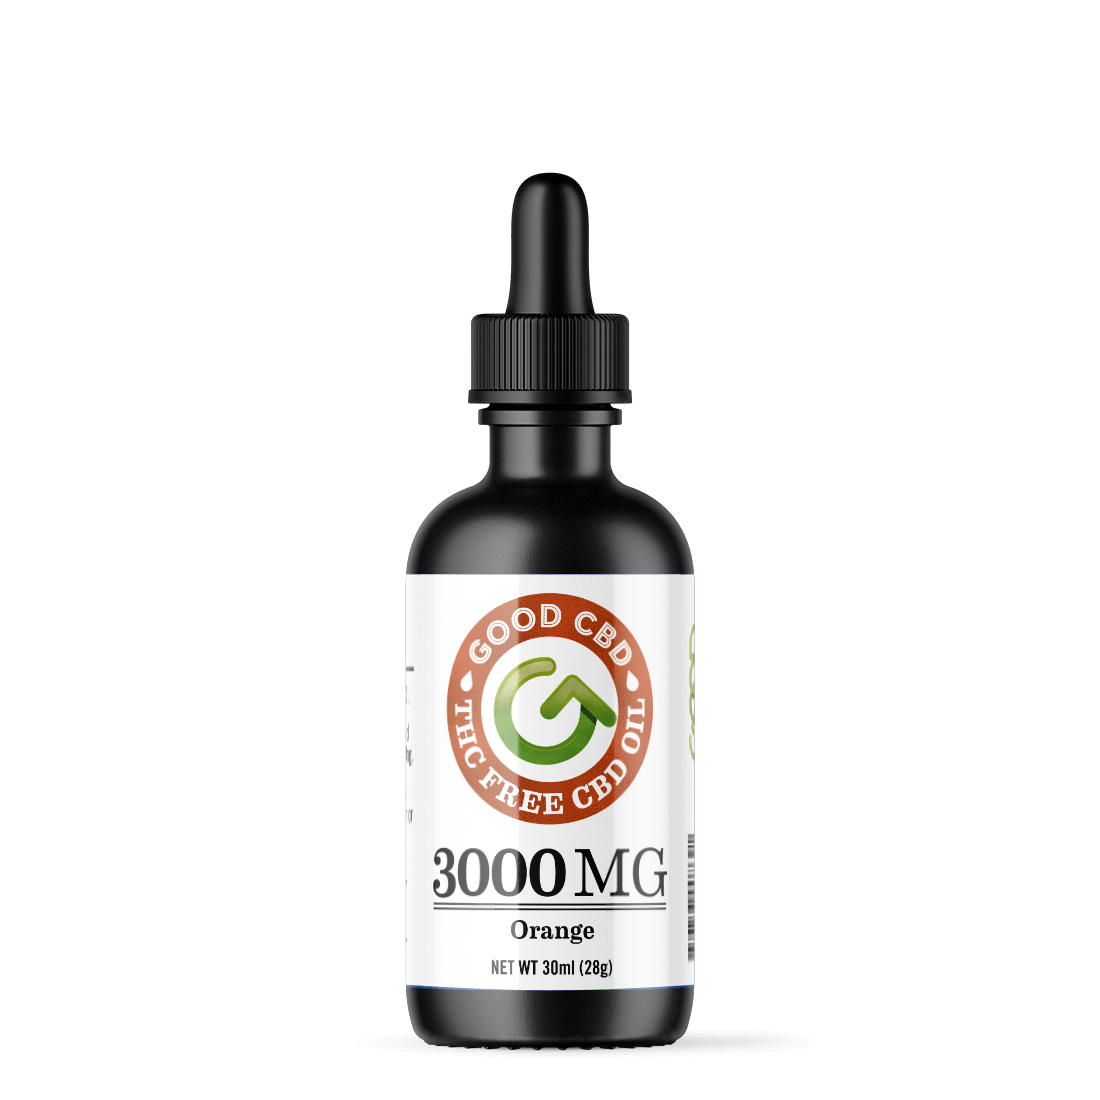 Best CBD Oil is available at GoodCBD.com. We offers CBD for anxiety, CBD for pain, CBN oil for sale. Our website carries brands such as: 3CHI, Good CBD, Urb, Injoy Extracts, AiroPro, Delta Effex, and more.